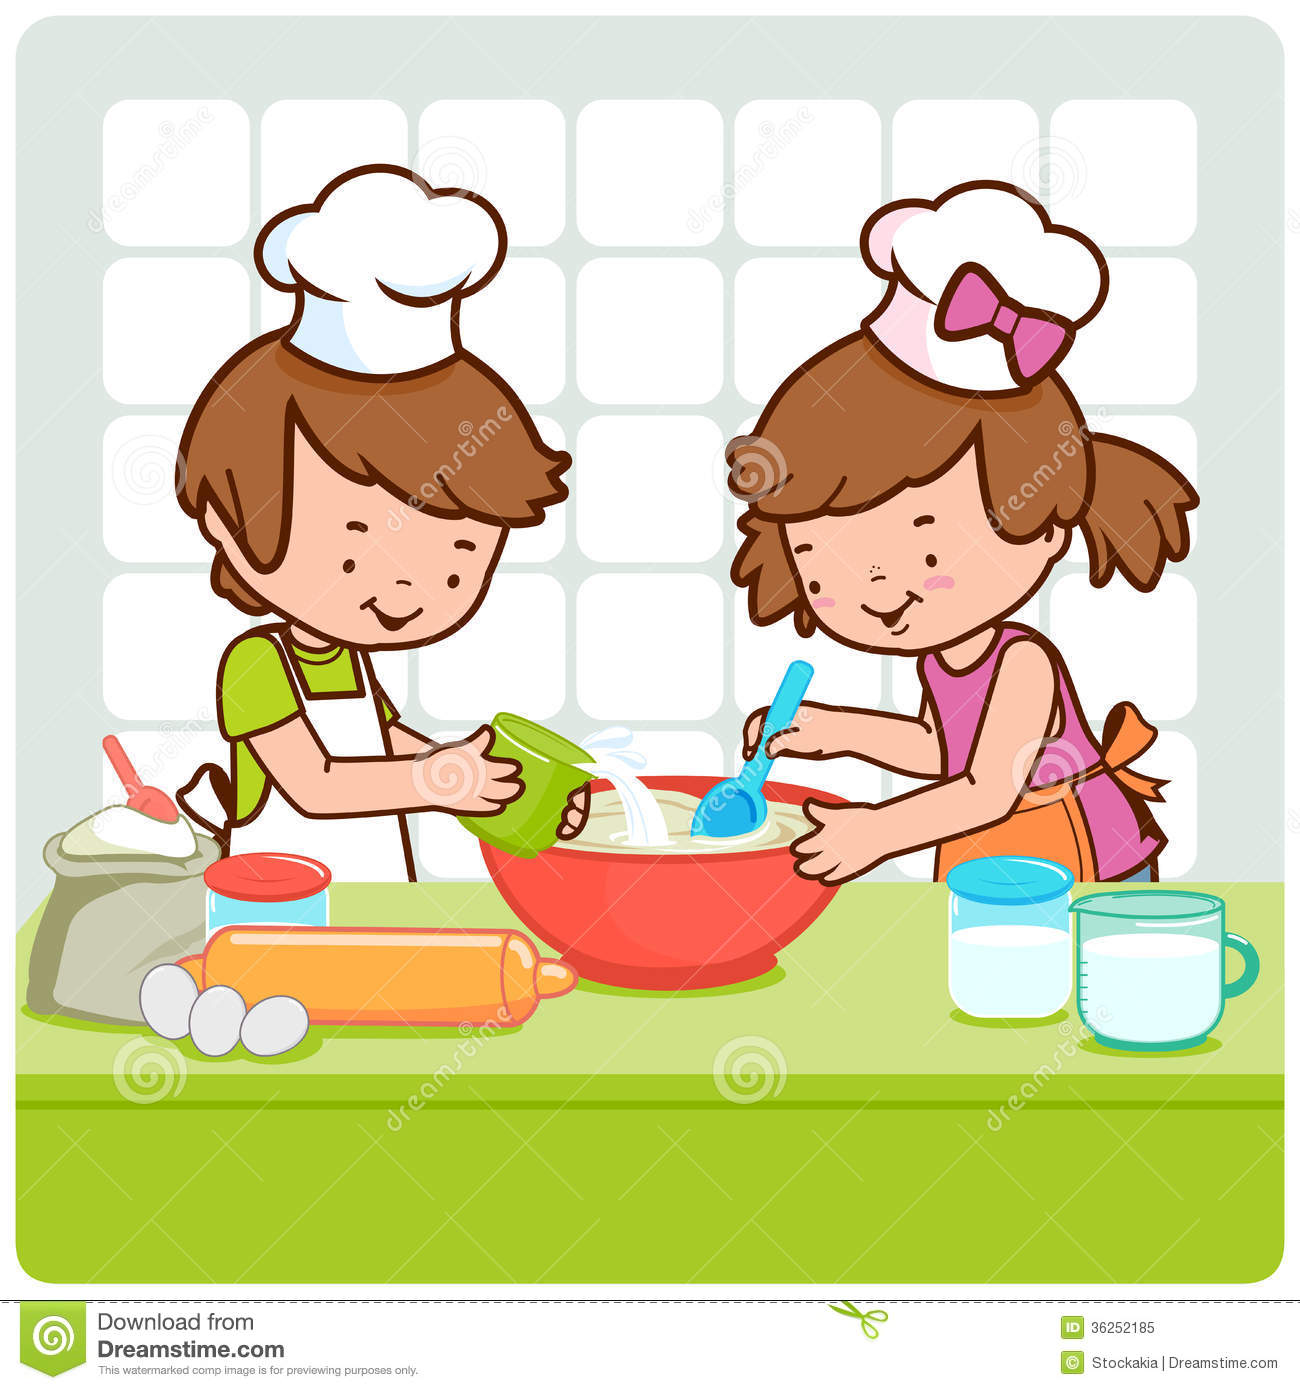 clip art images of cooking - photo #27